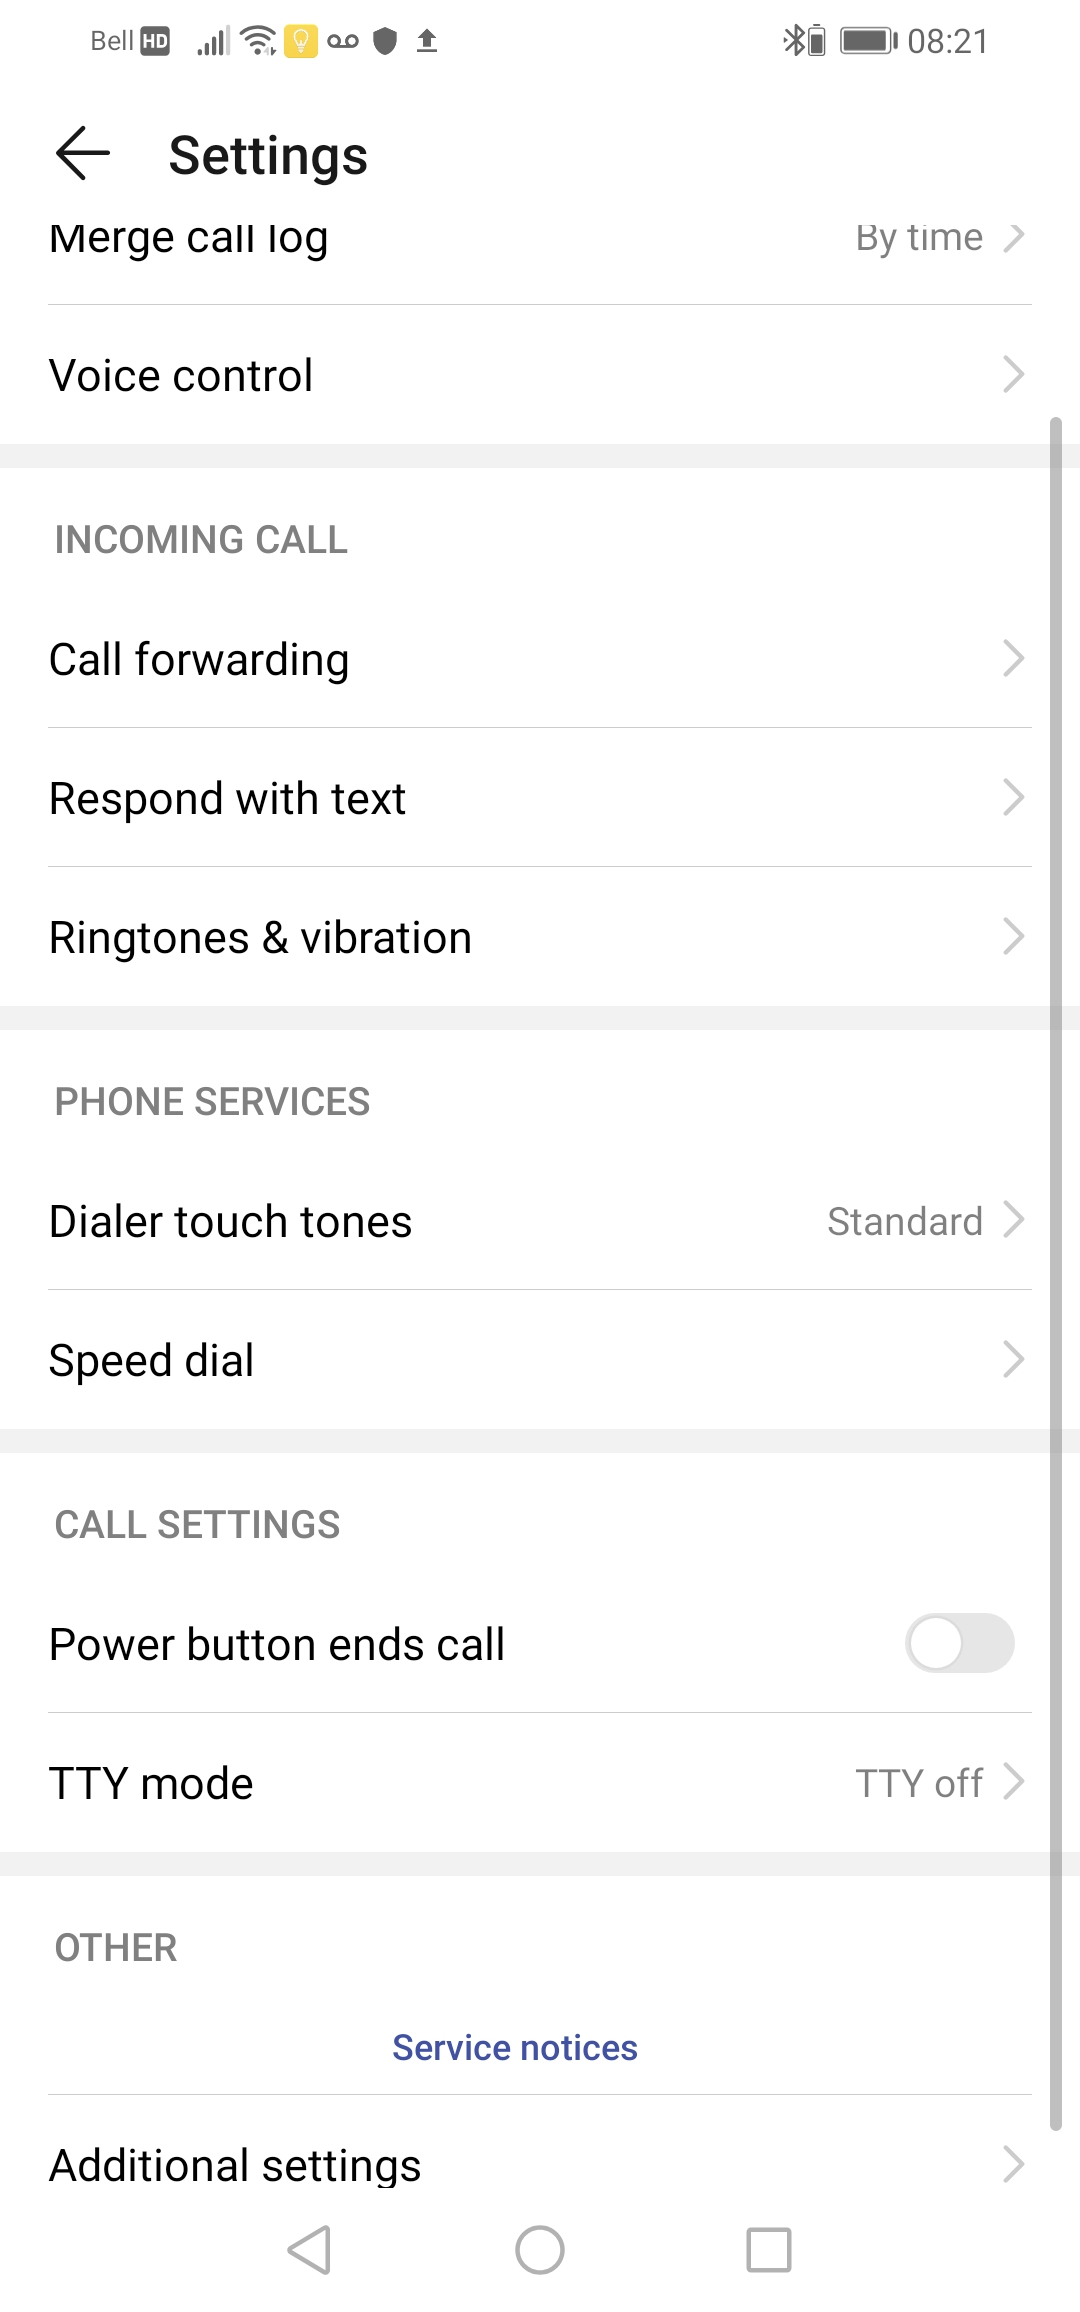 Scroll to and touch Additional settings.